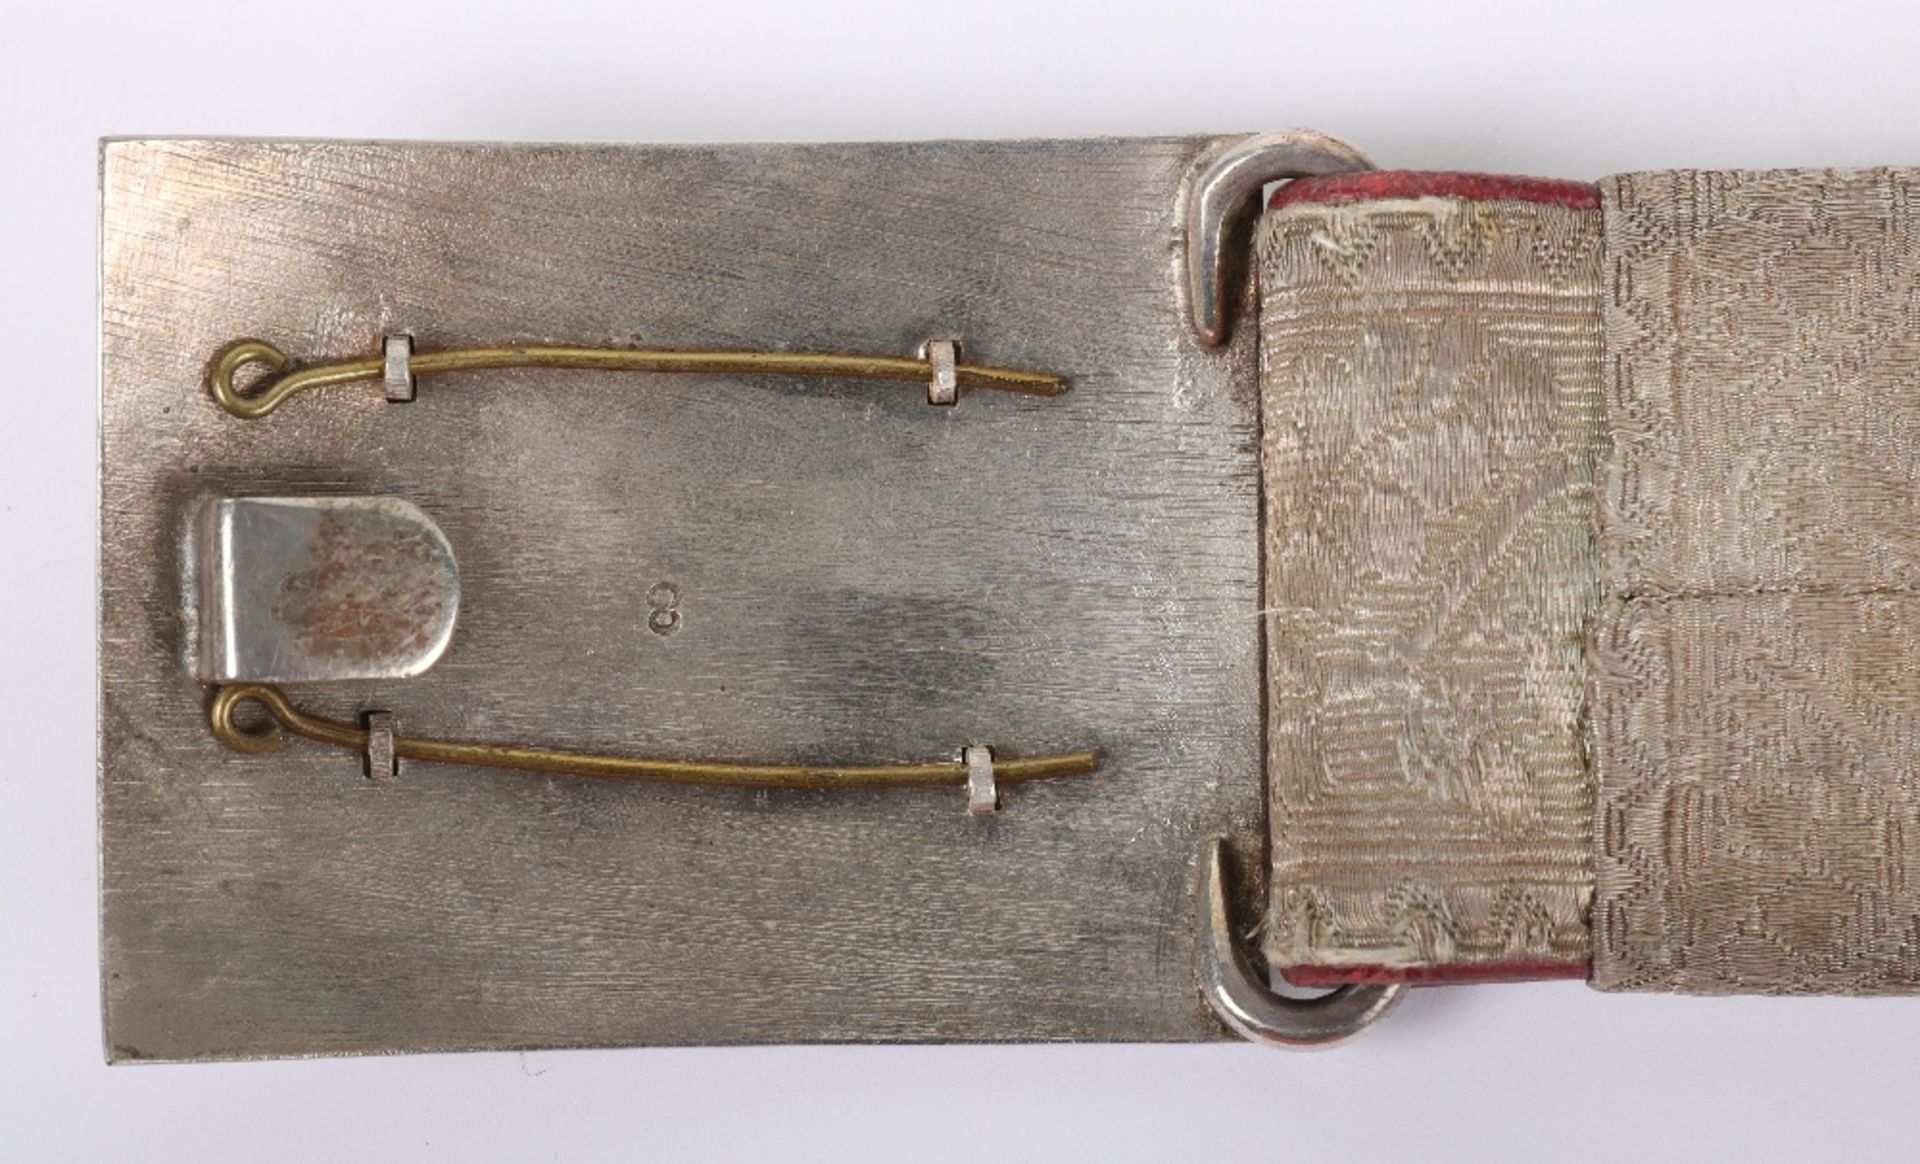 Edward 7th Courtsword, Embroidered Belt & Hanger, Cased Epaulettes for a Lord Lieutenant of an Engli - Image 32 of 38